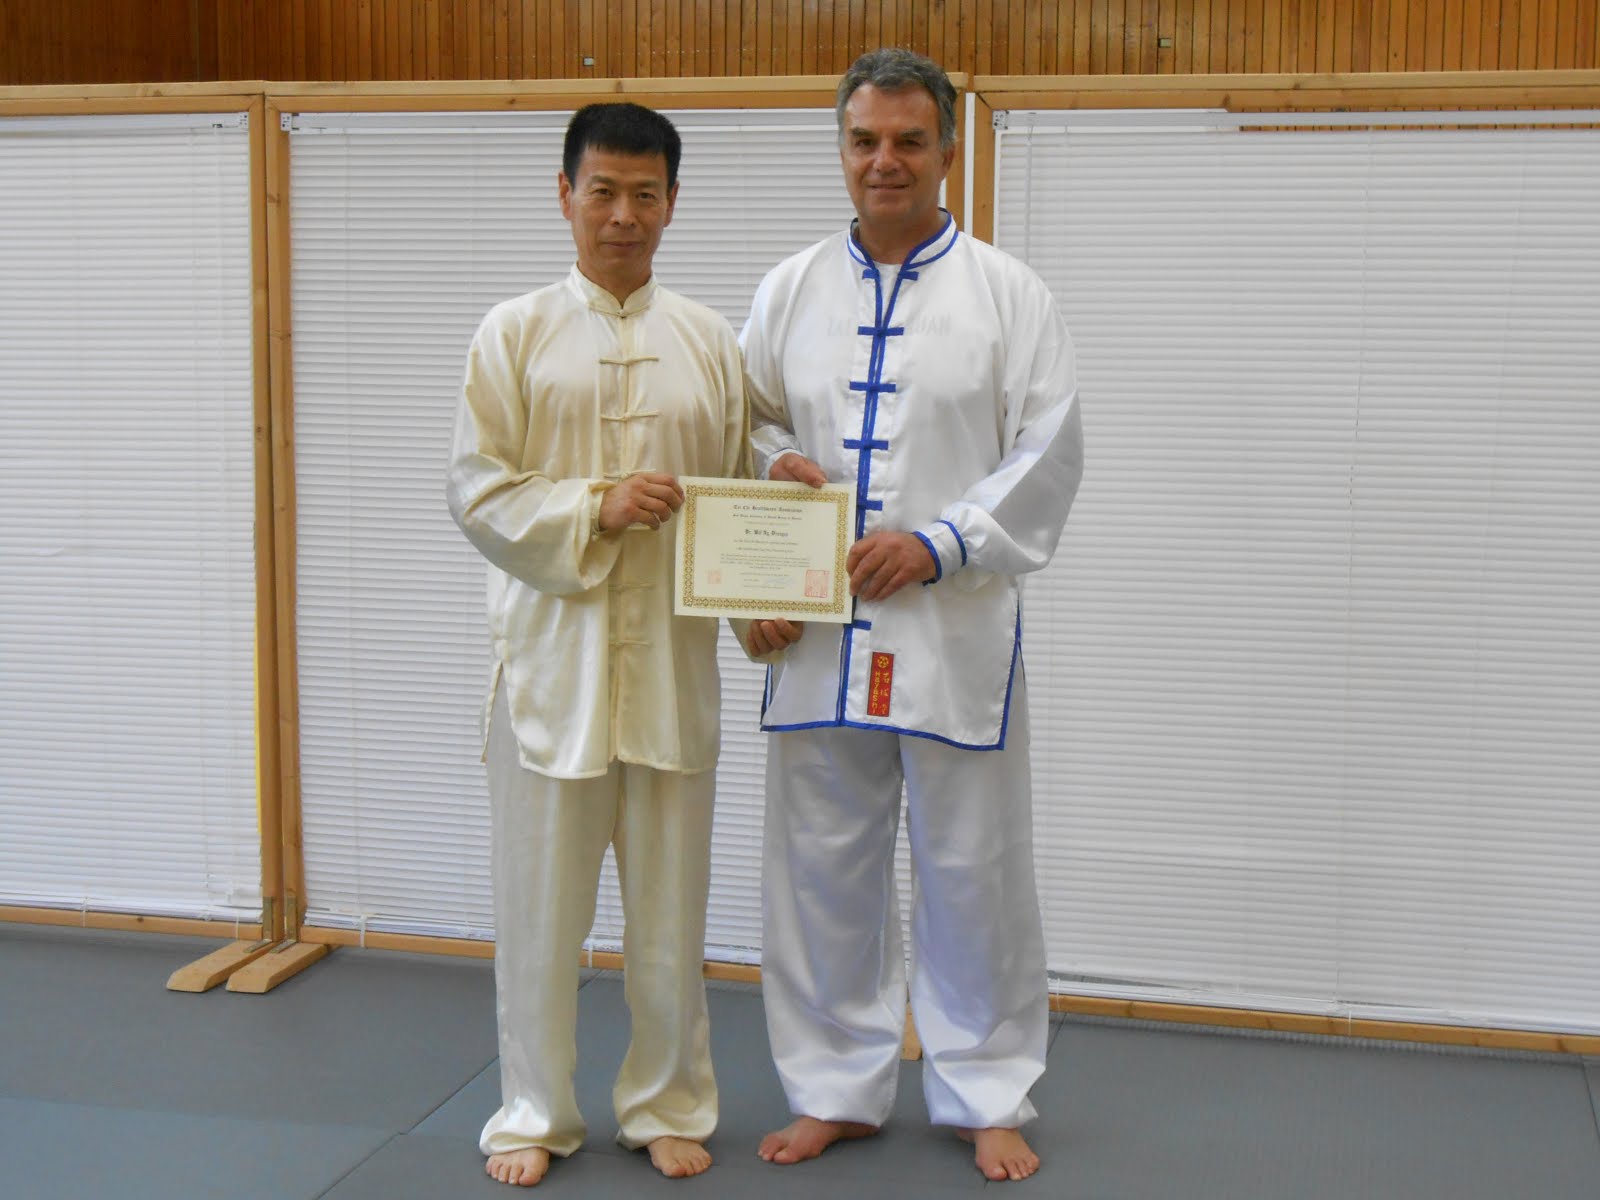 Dr Bill Ag. Drougas Recognized to the Master Level Tai Chi Chuan